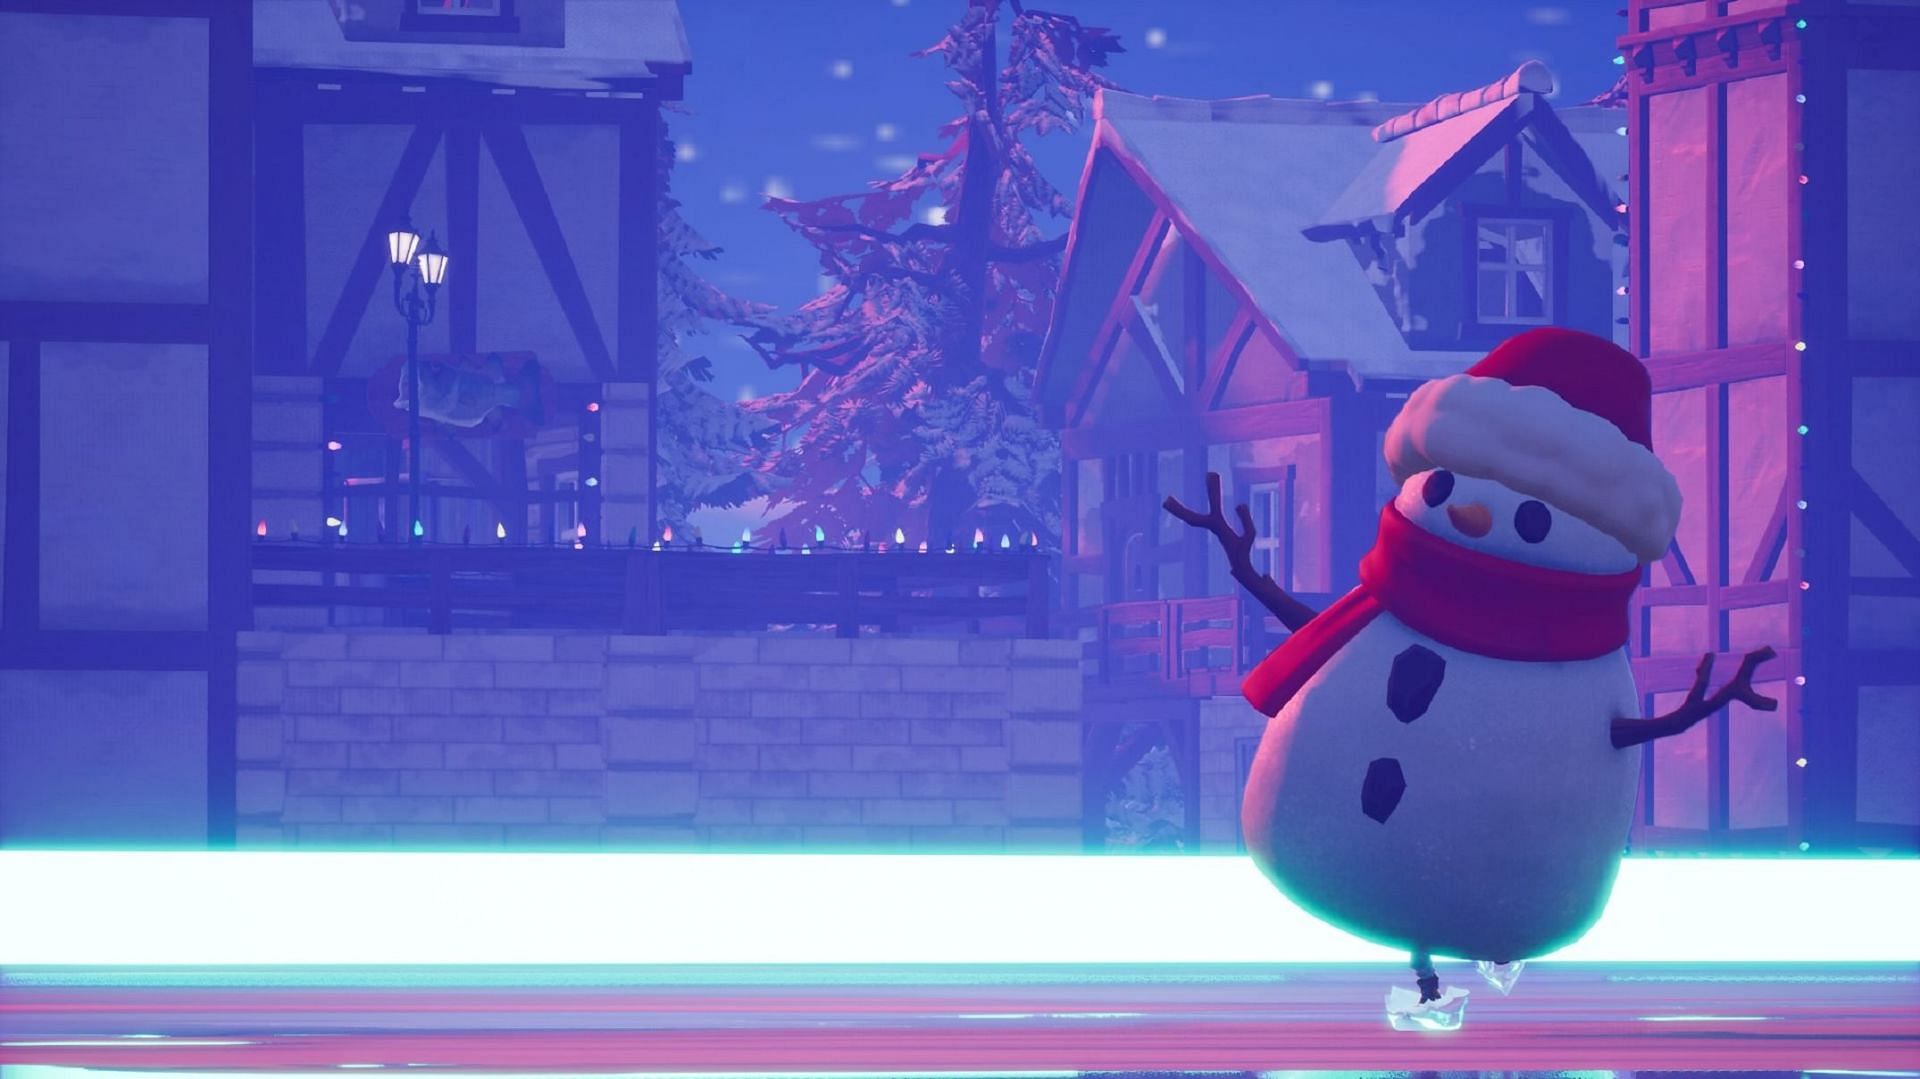 That snowman has feet...that&#039;s very suspicious (Image Twitter/RiiiCON_cryptic)